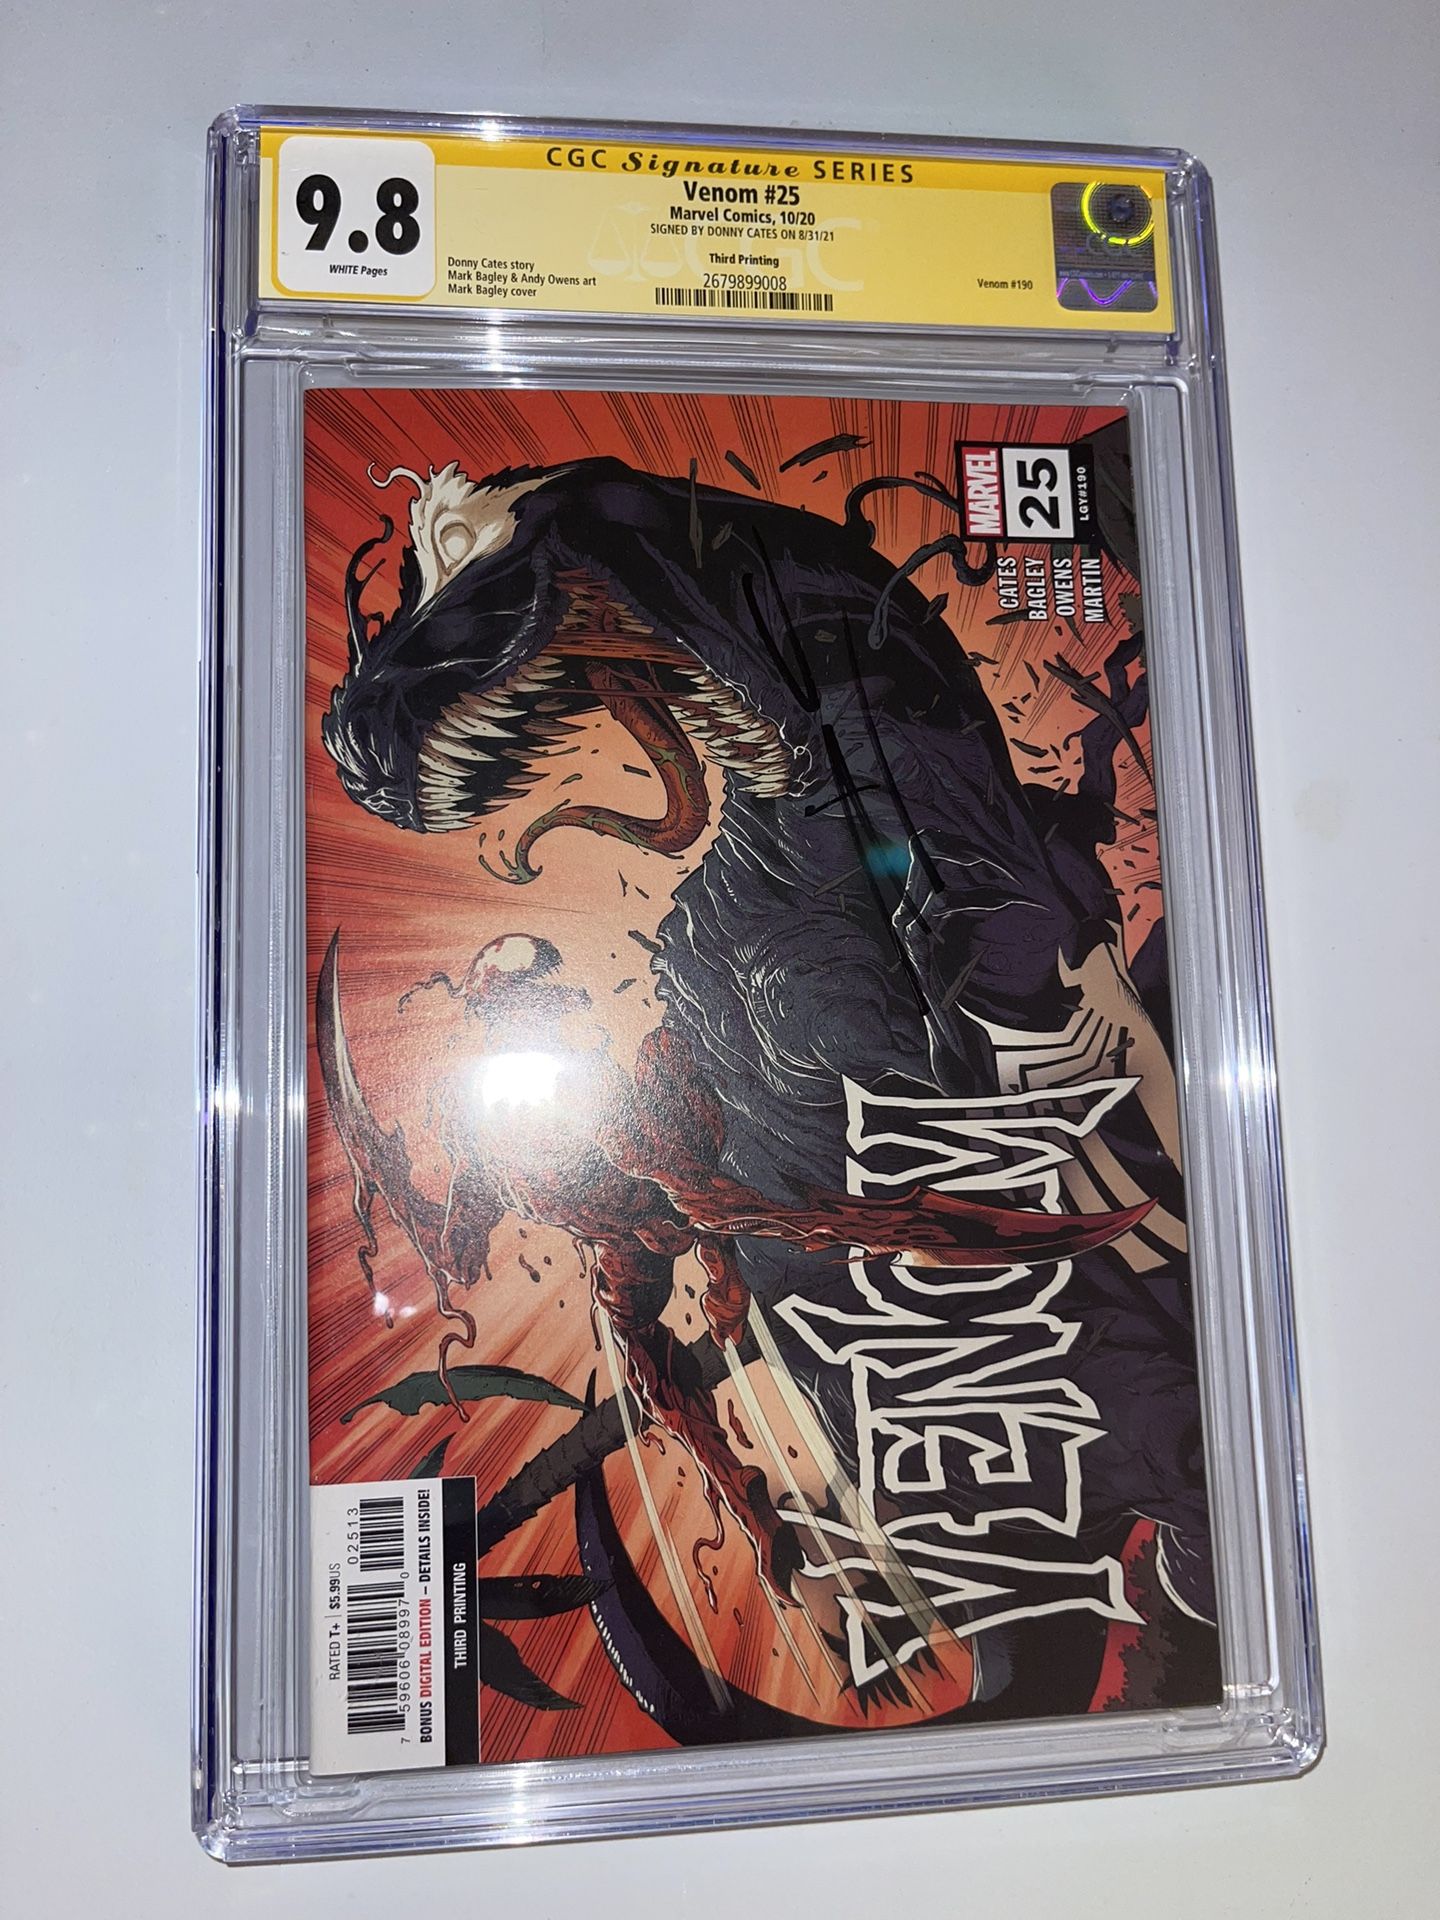 VENOM #25 CGC SS 9.8 Signed by DONNY CATES Marvel Comics 2020 3rd Print Variant 